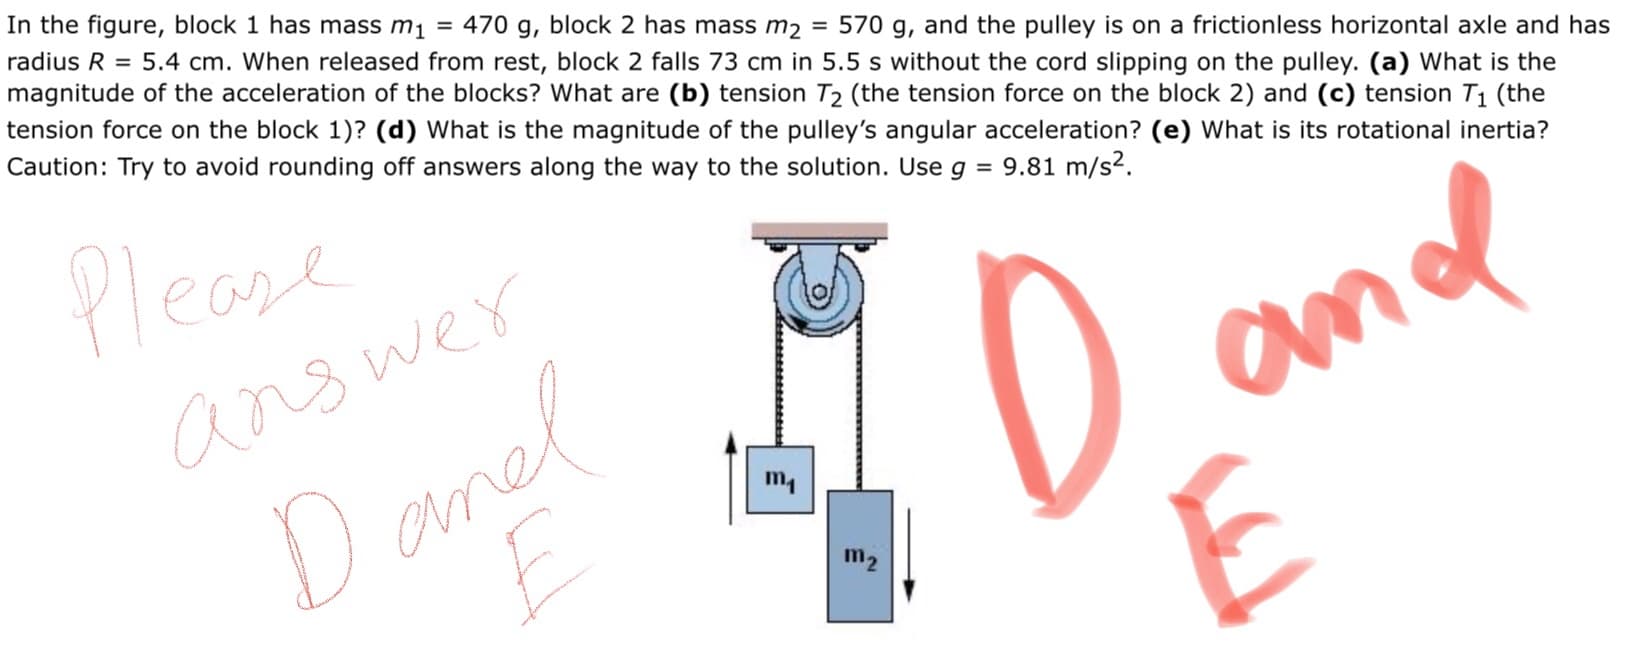 In the figure, block 1 has mass m1 = 470 g, block 2 has mass m2
radius R = 5.4 cm. When released from rest, block 2 falls 73 cm in 5.5 s without the cord slipping on the pulley. (a) What is the
magnitude of the acceleration of the blocks? What are (b) tension T2 (the tension force on the block 2) and (c) tension T1 (the
tension force on the block 1)? (d) What is the magnitude of the pulley's angular acceleration? (e) What is its rotational inertia?
Caution: Try to avoid rounding off answers along the way to the solution. Use g = 9.81 m/s2.
= 570 g, and the pulley is on a frictionless horizontal axle and has
Please
ans wer
m1
Danel
m2
